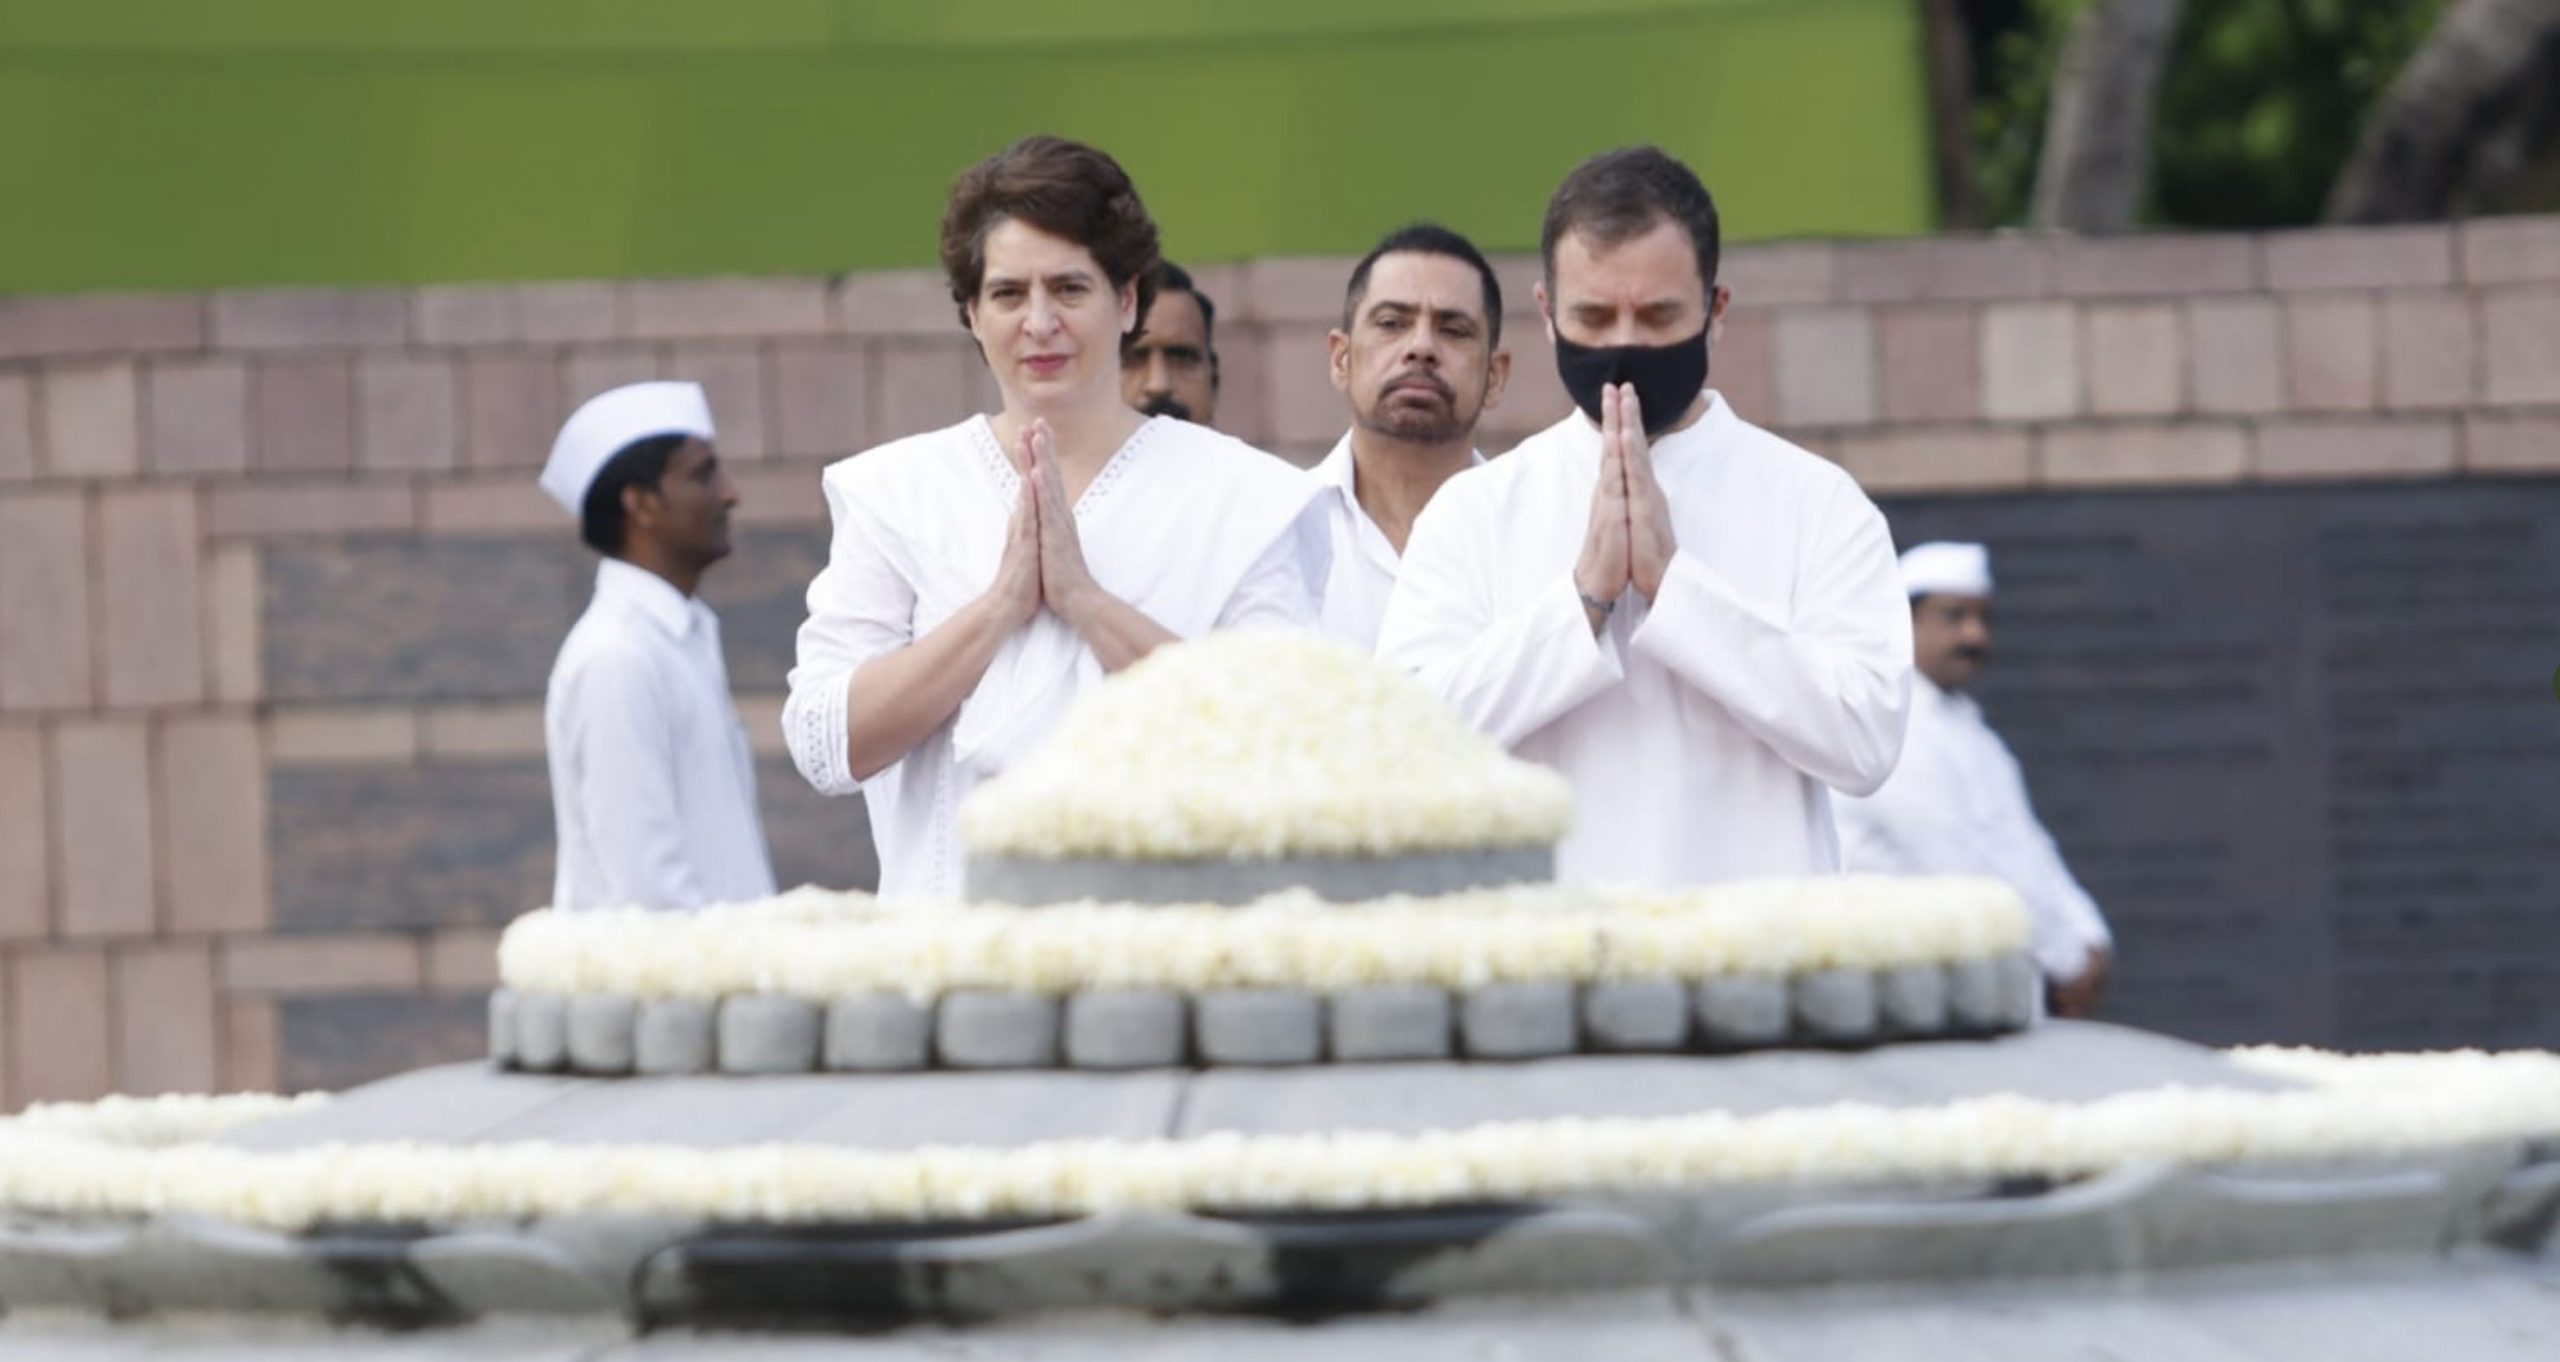 You’re in my heart: Rahul Gandhi’s homage to father Rajiv on Harmony Day